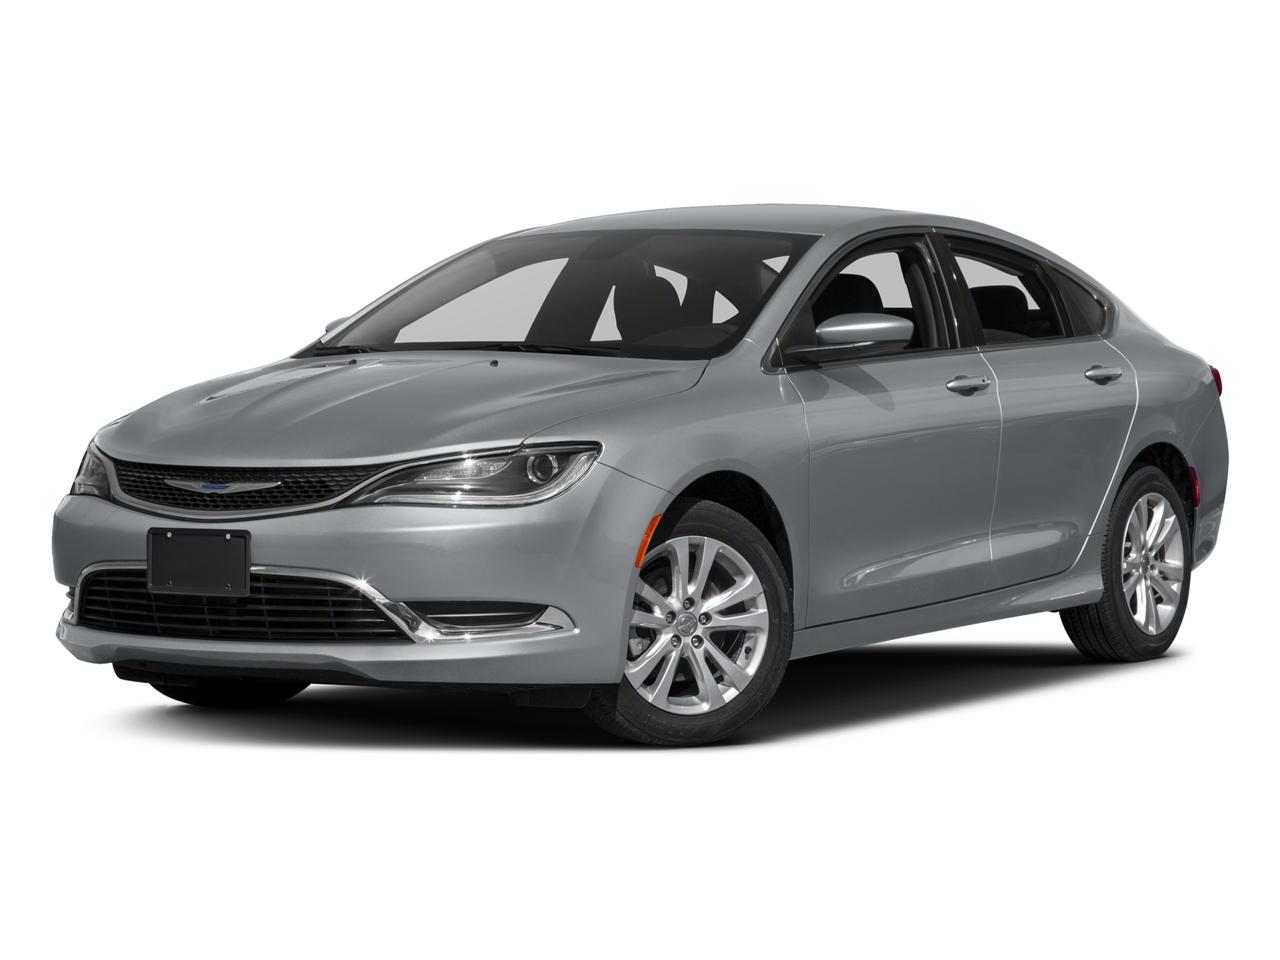 2016 Chrysler 200 Vehicle Photo in CAPE MAY COURT HOUSE, NJ 08210-2432